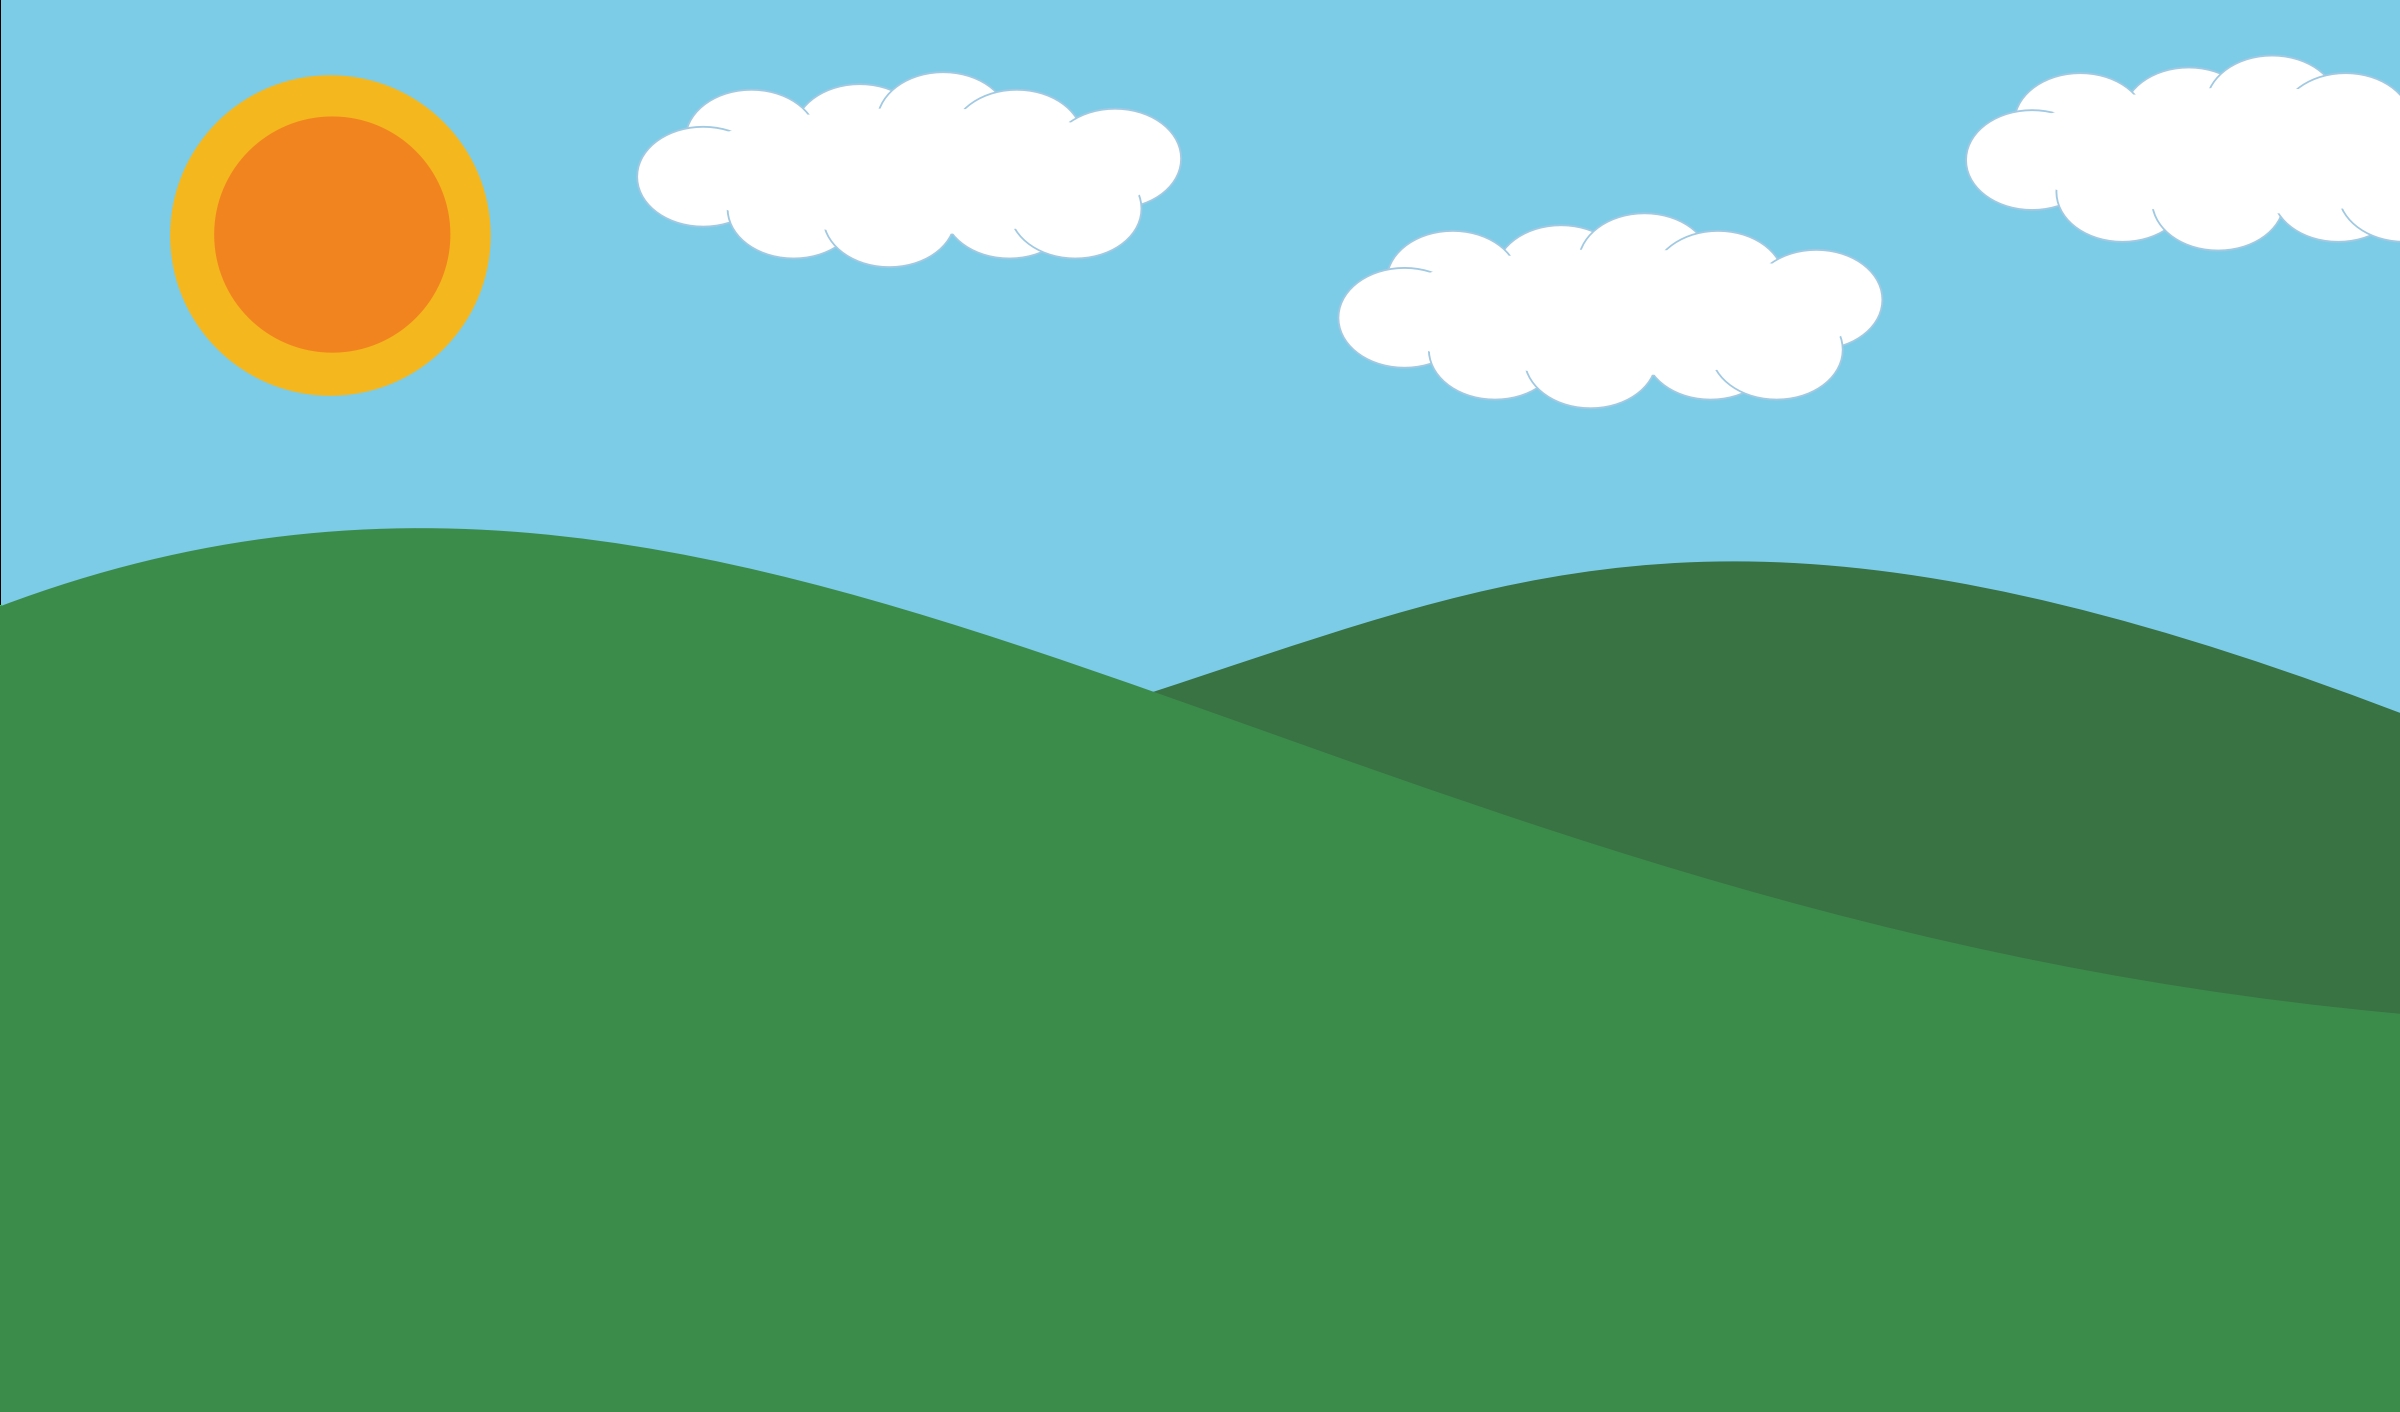 Hill clipart hill background, Hill hill background